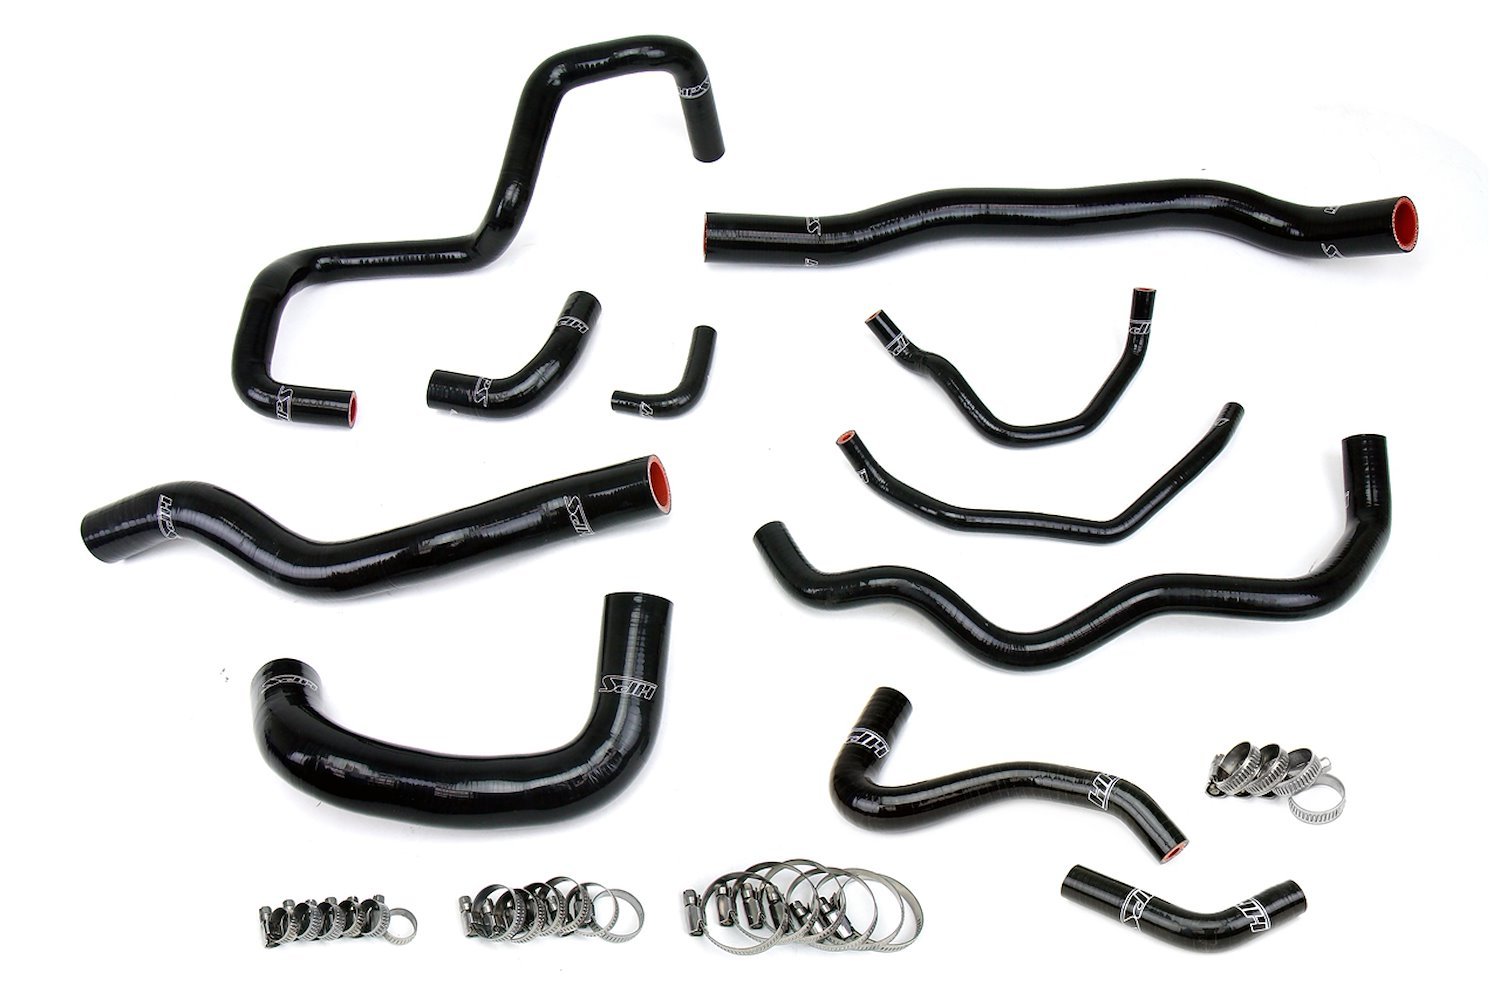 57-1876-BLK Coolant Hose Kit, 3-Ply Reinforced Silicone, Replaces Rubber Coolant Hoses